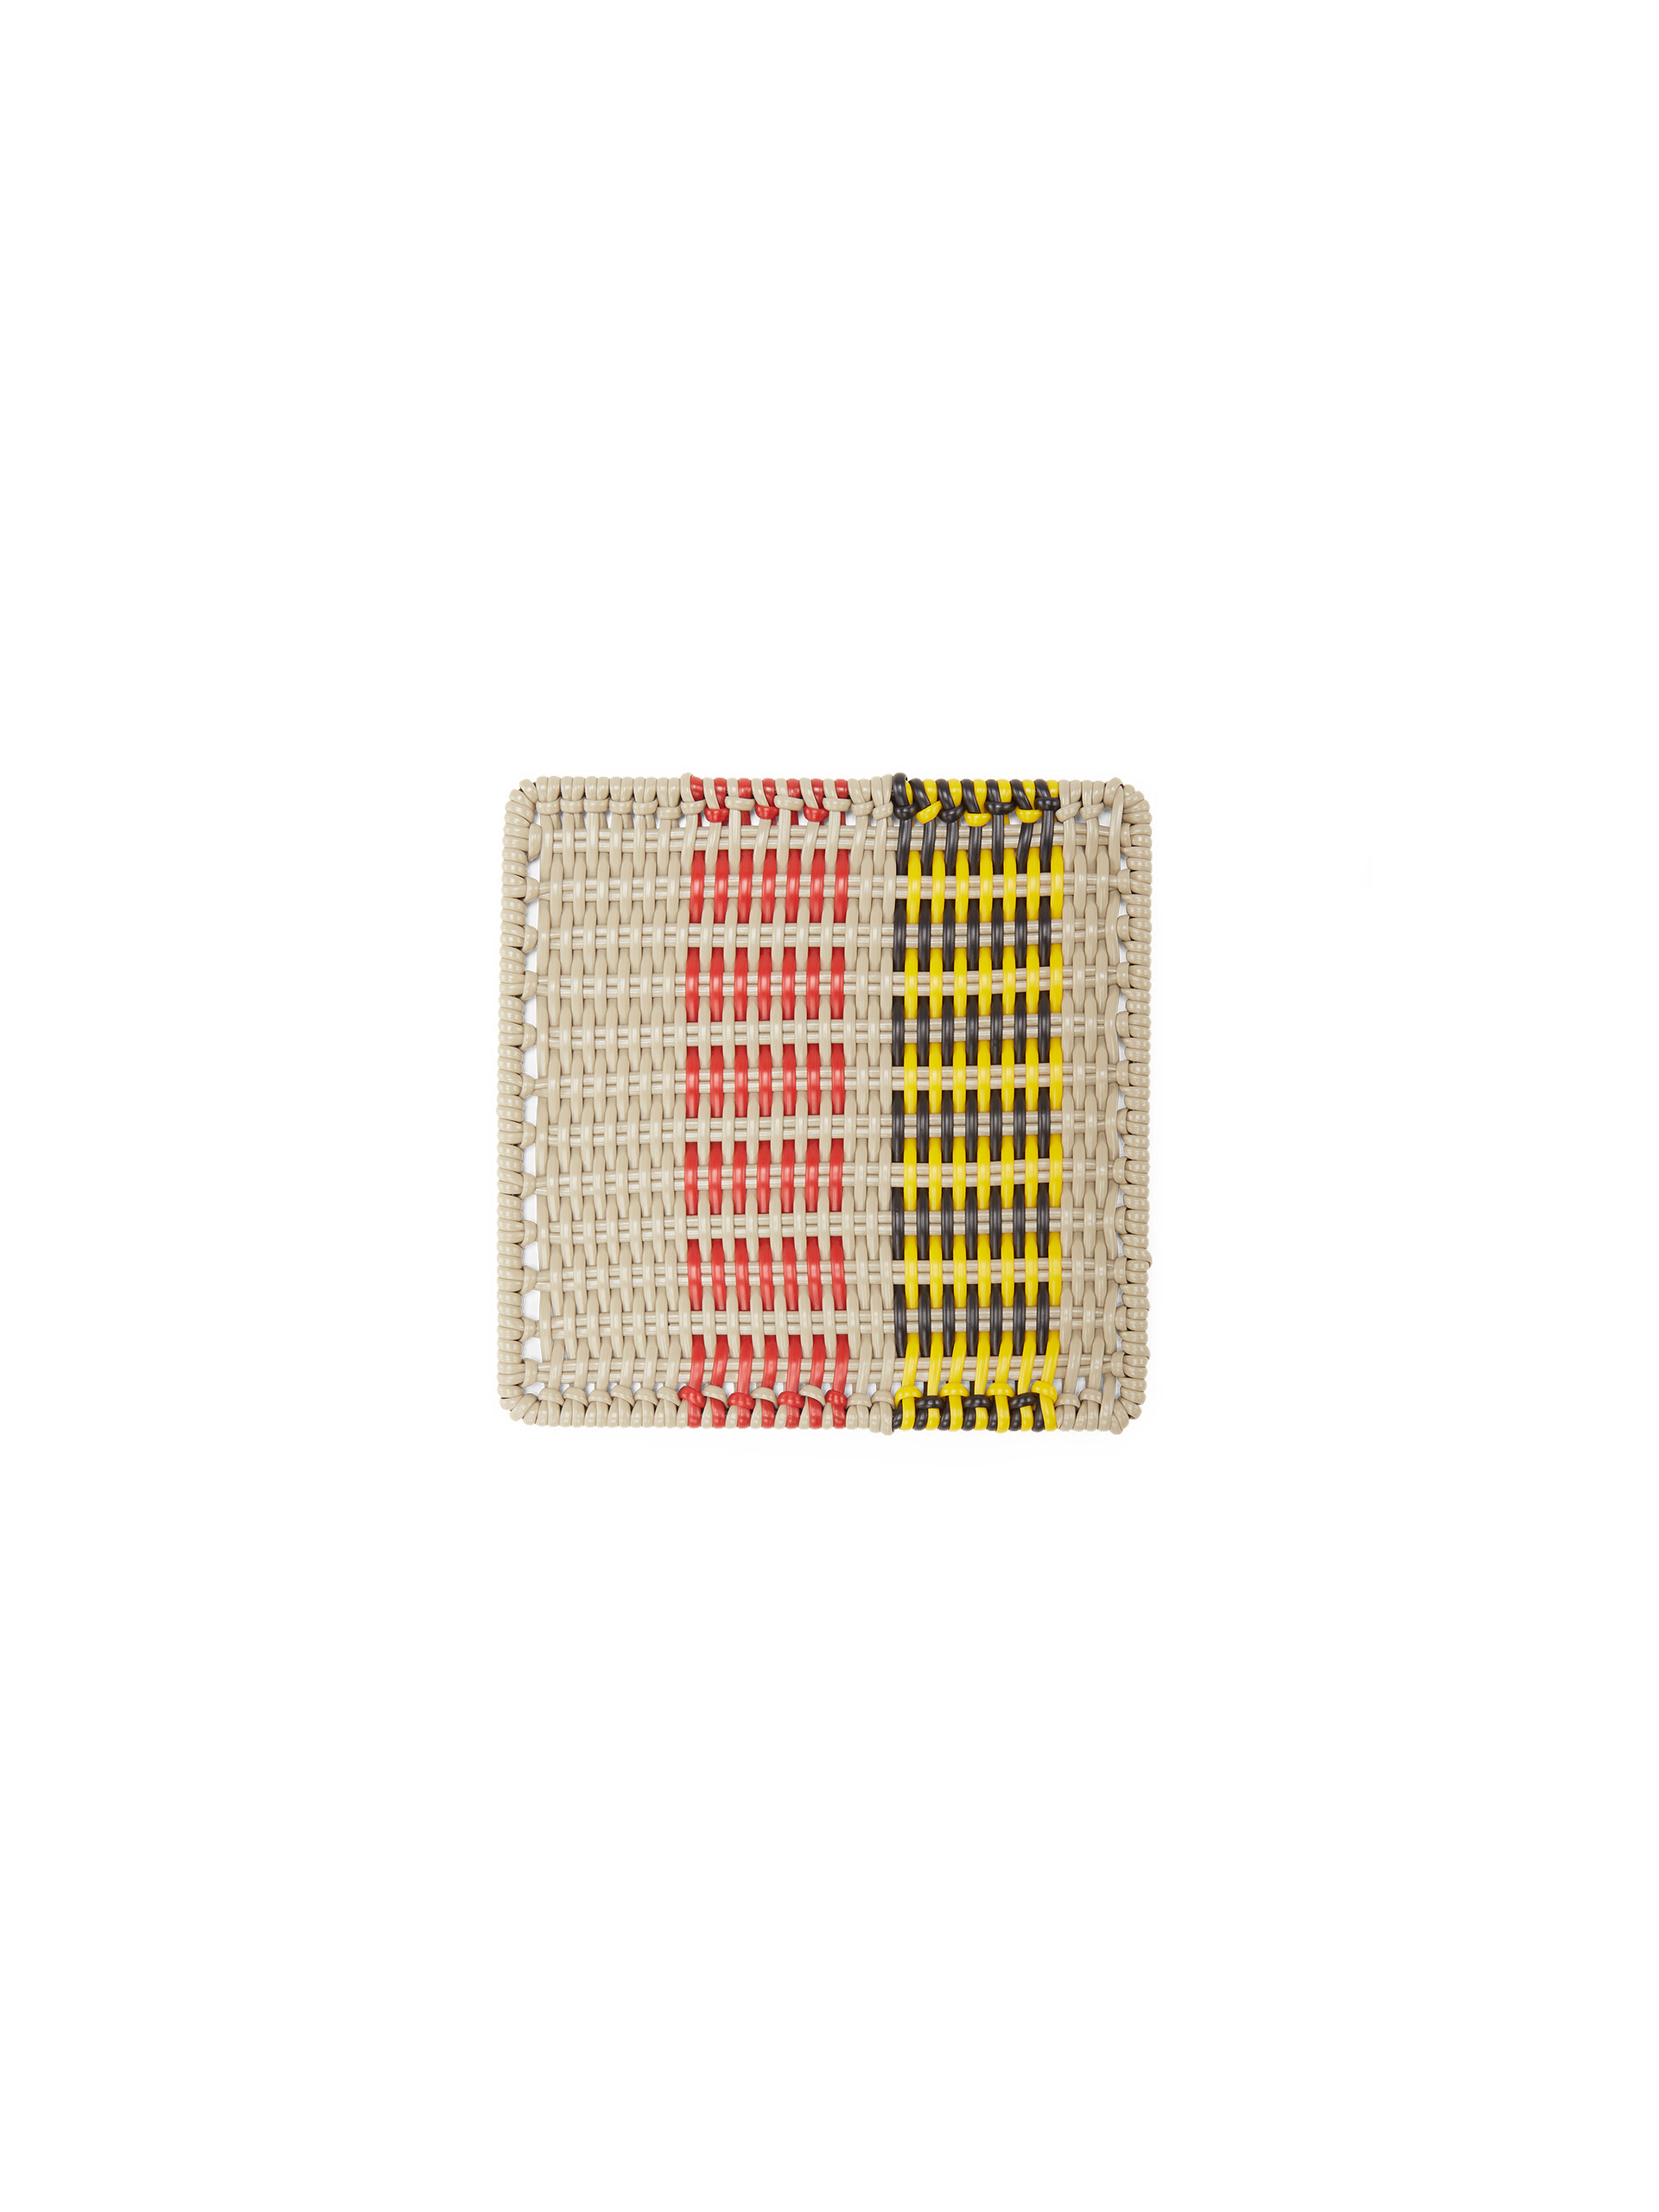 MARNI MARKET square mat with striped motif in iron and yellow, black, red and beige woven PVC - Accessories - Image 2